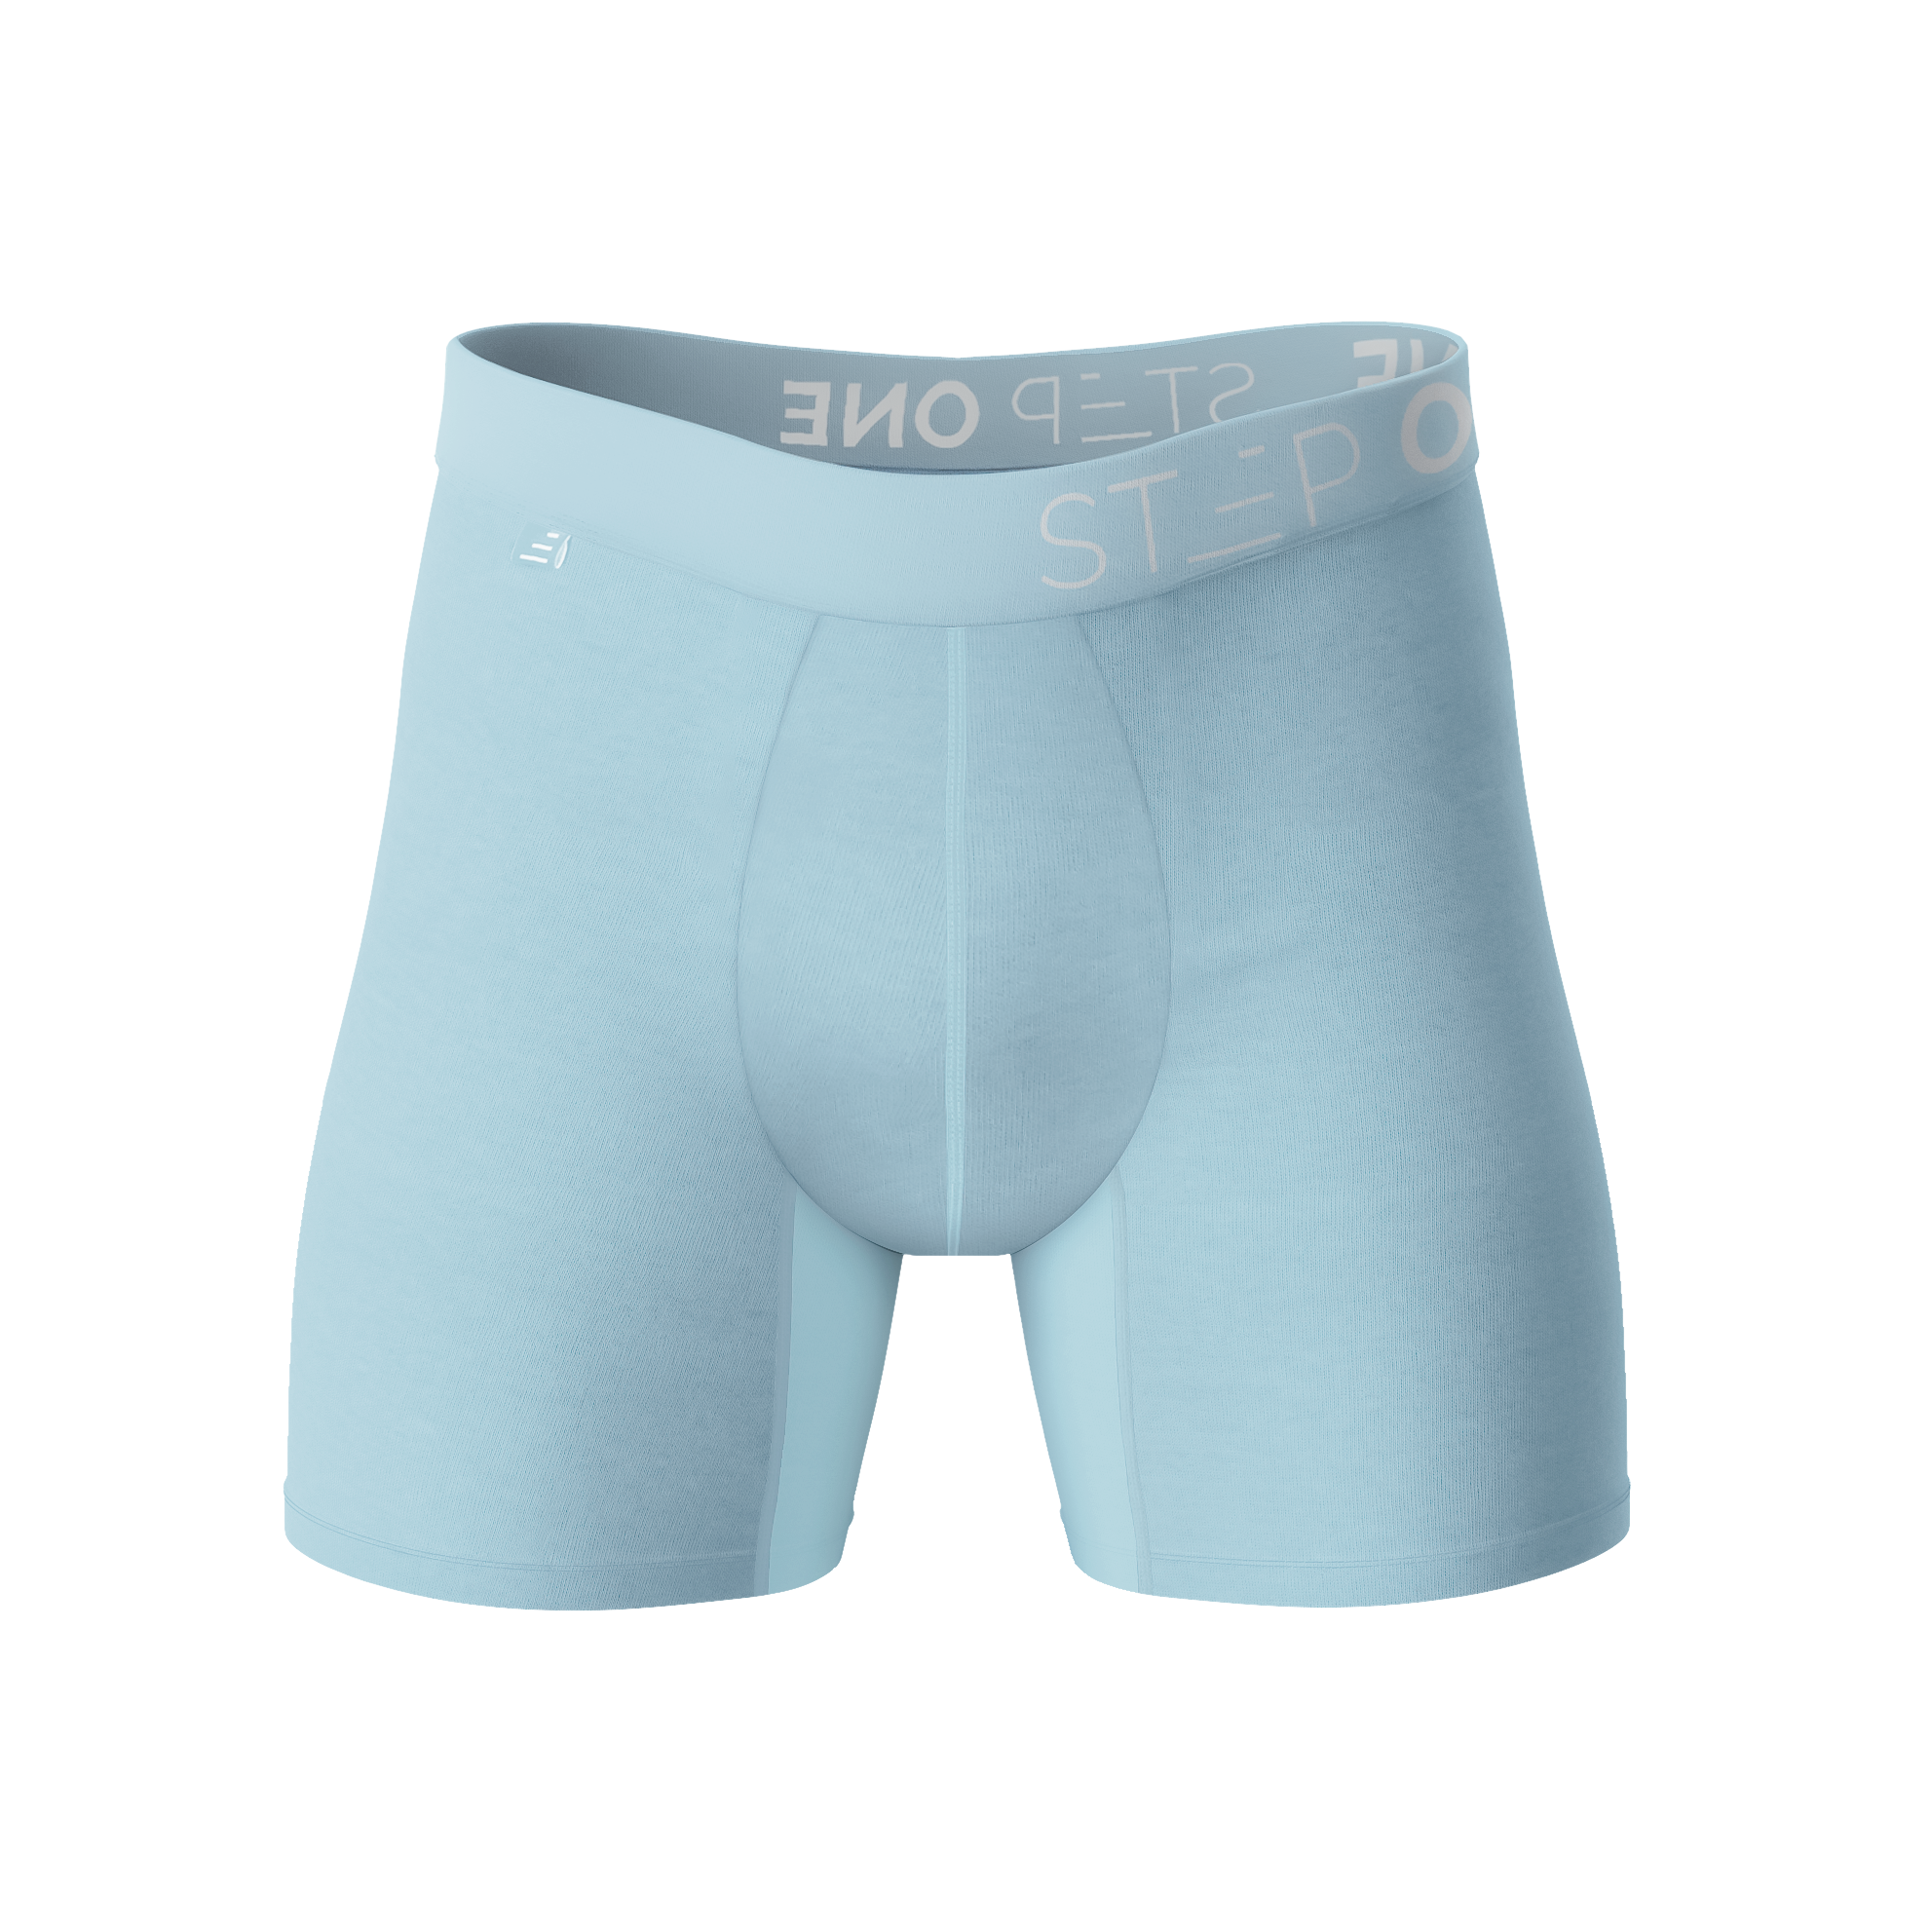 Boxer Brief - Ice Cubes - View 1